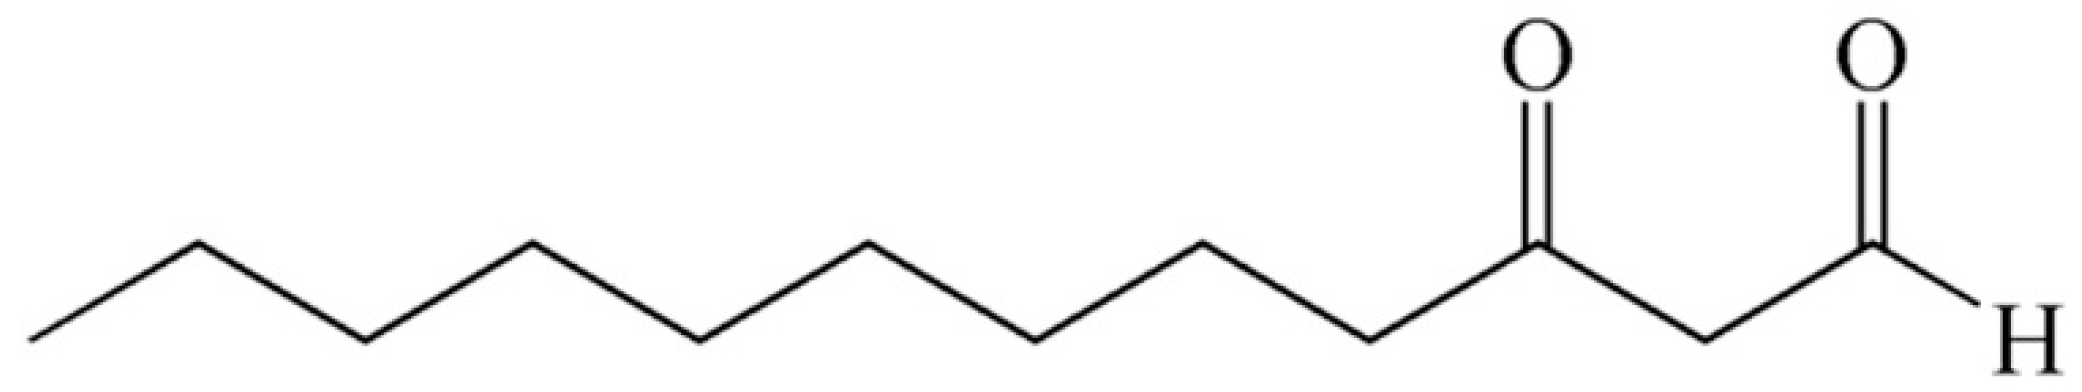 strong Figure 1/strong br/ p Chemical structure of Hou (3-oxododecanal)./p 